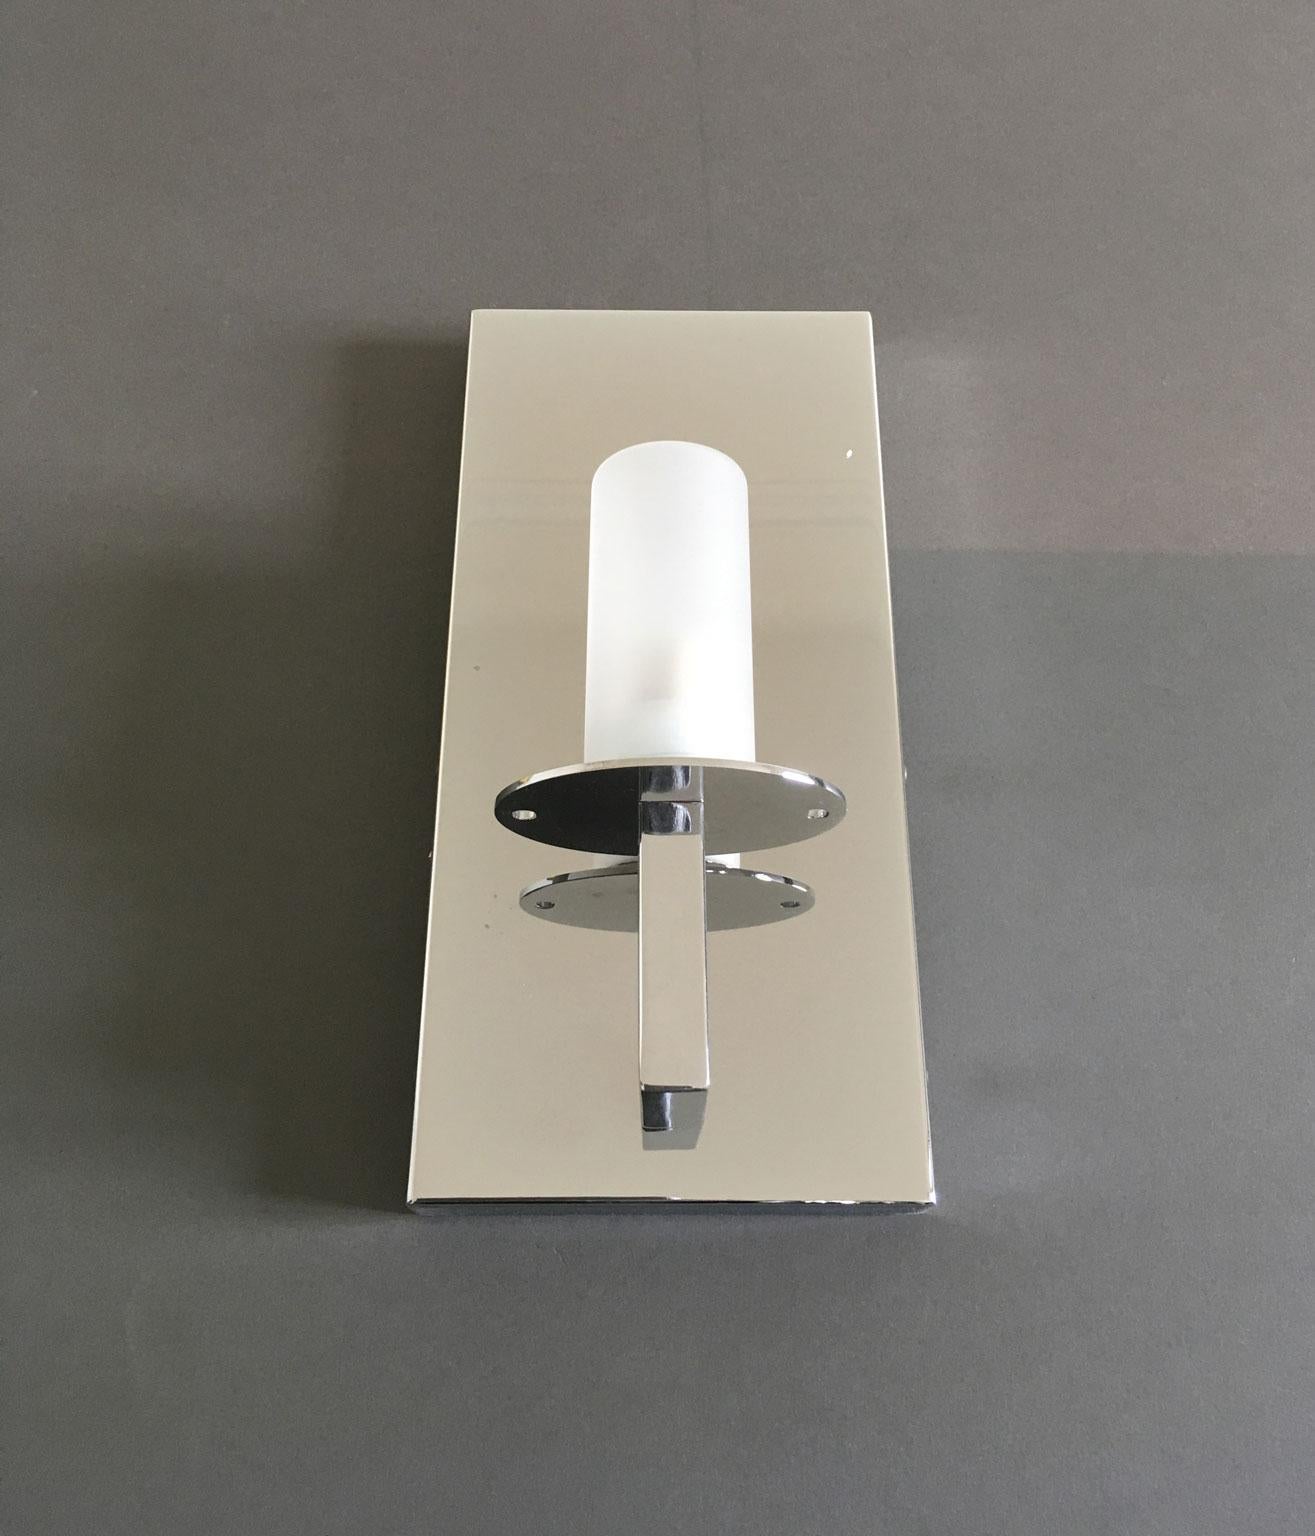 This elegant wall light is totally made in Italy. It has an essential and minimal shape that make it perfectly matching everywhere. It is easy to armonized it in every room of your home, or to put it on the top of the mirror in the bathroom.
The